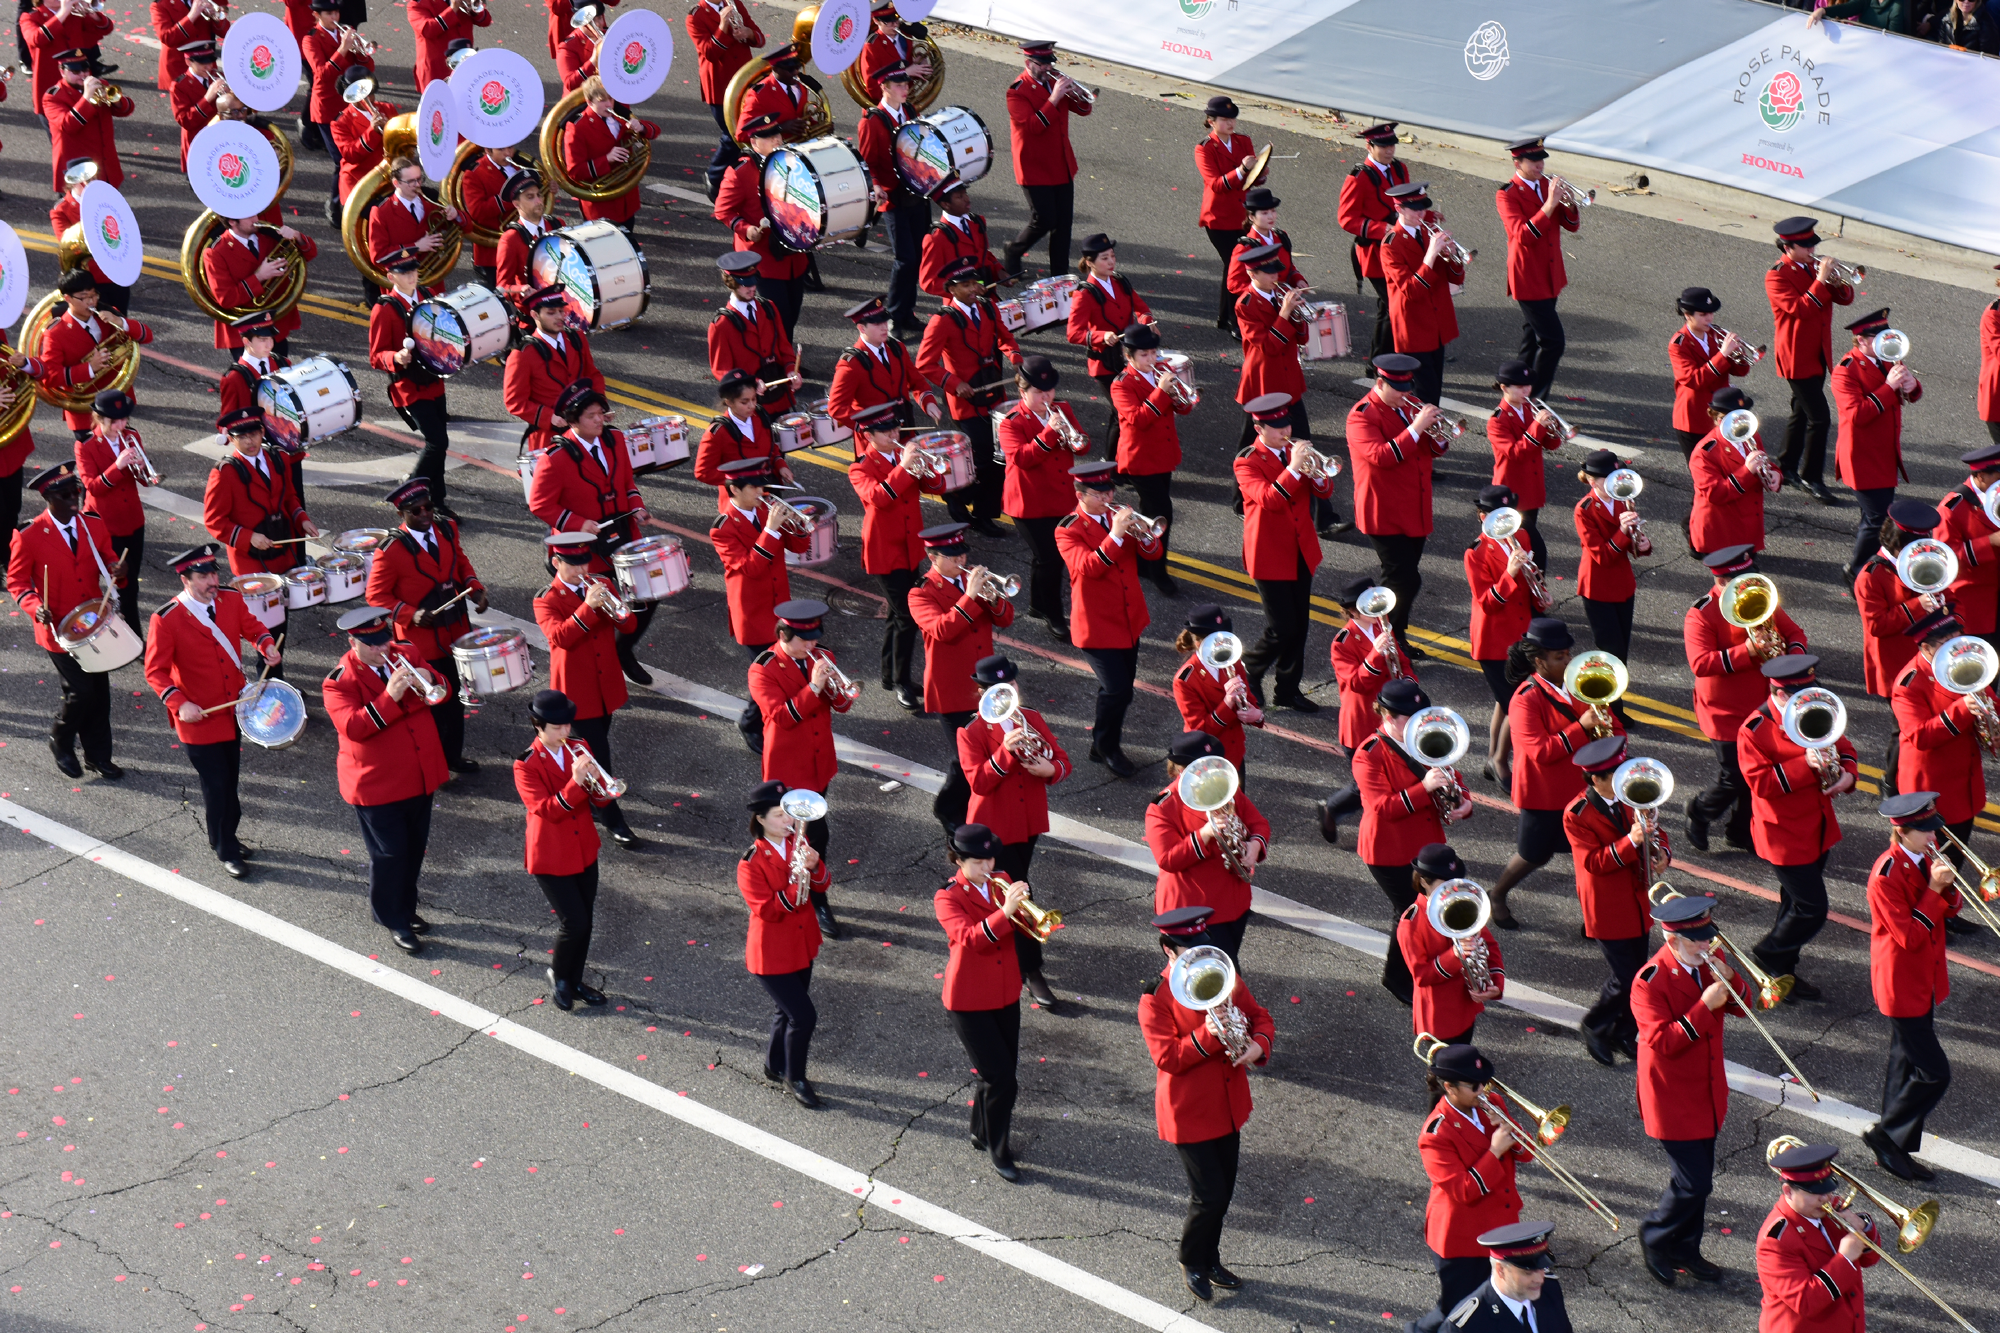 170: Inside The Salvation Army Rose Parade Experience with Kevin Larsson and Jim Sparks